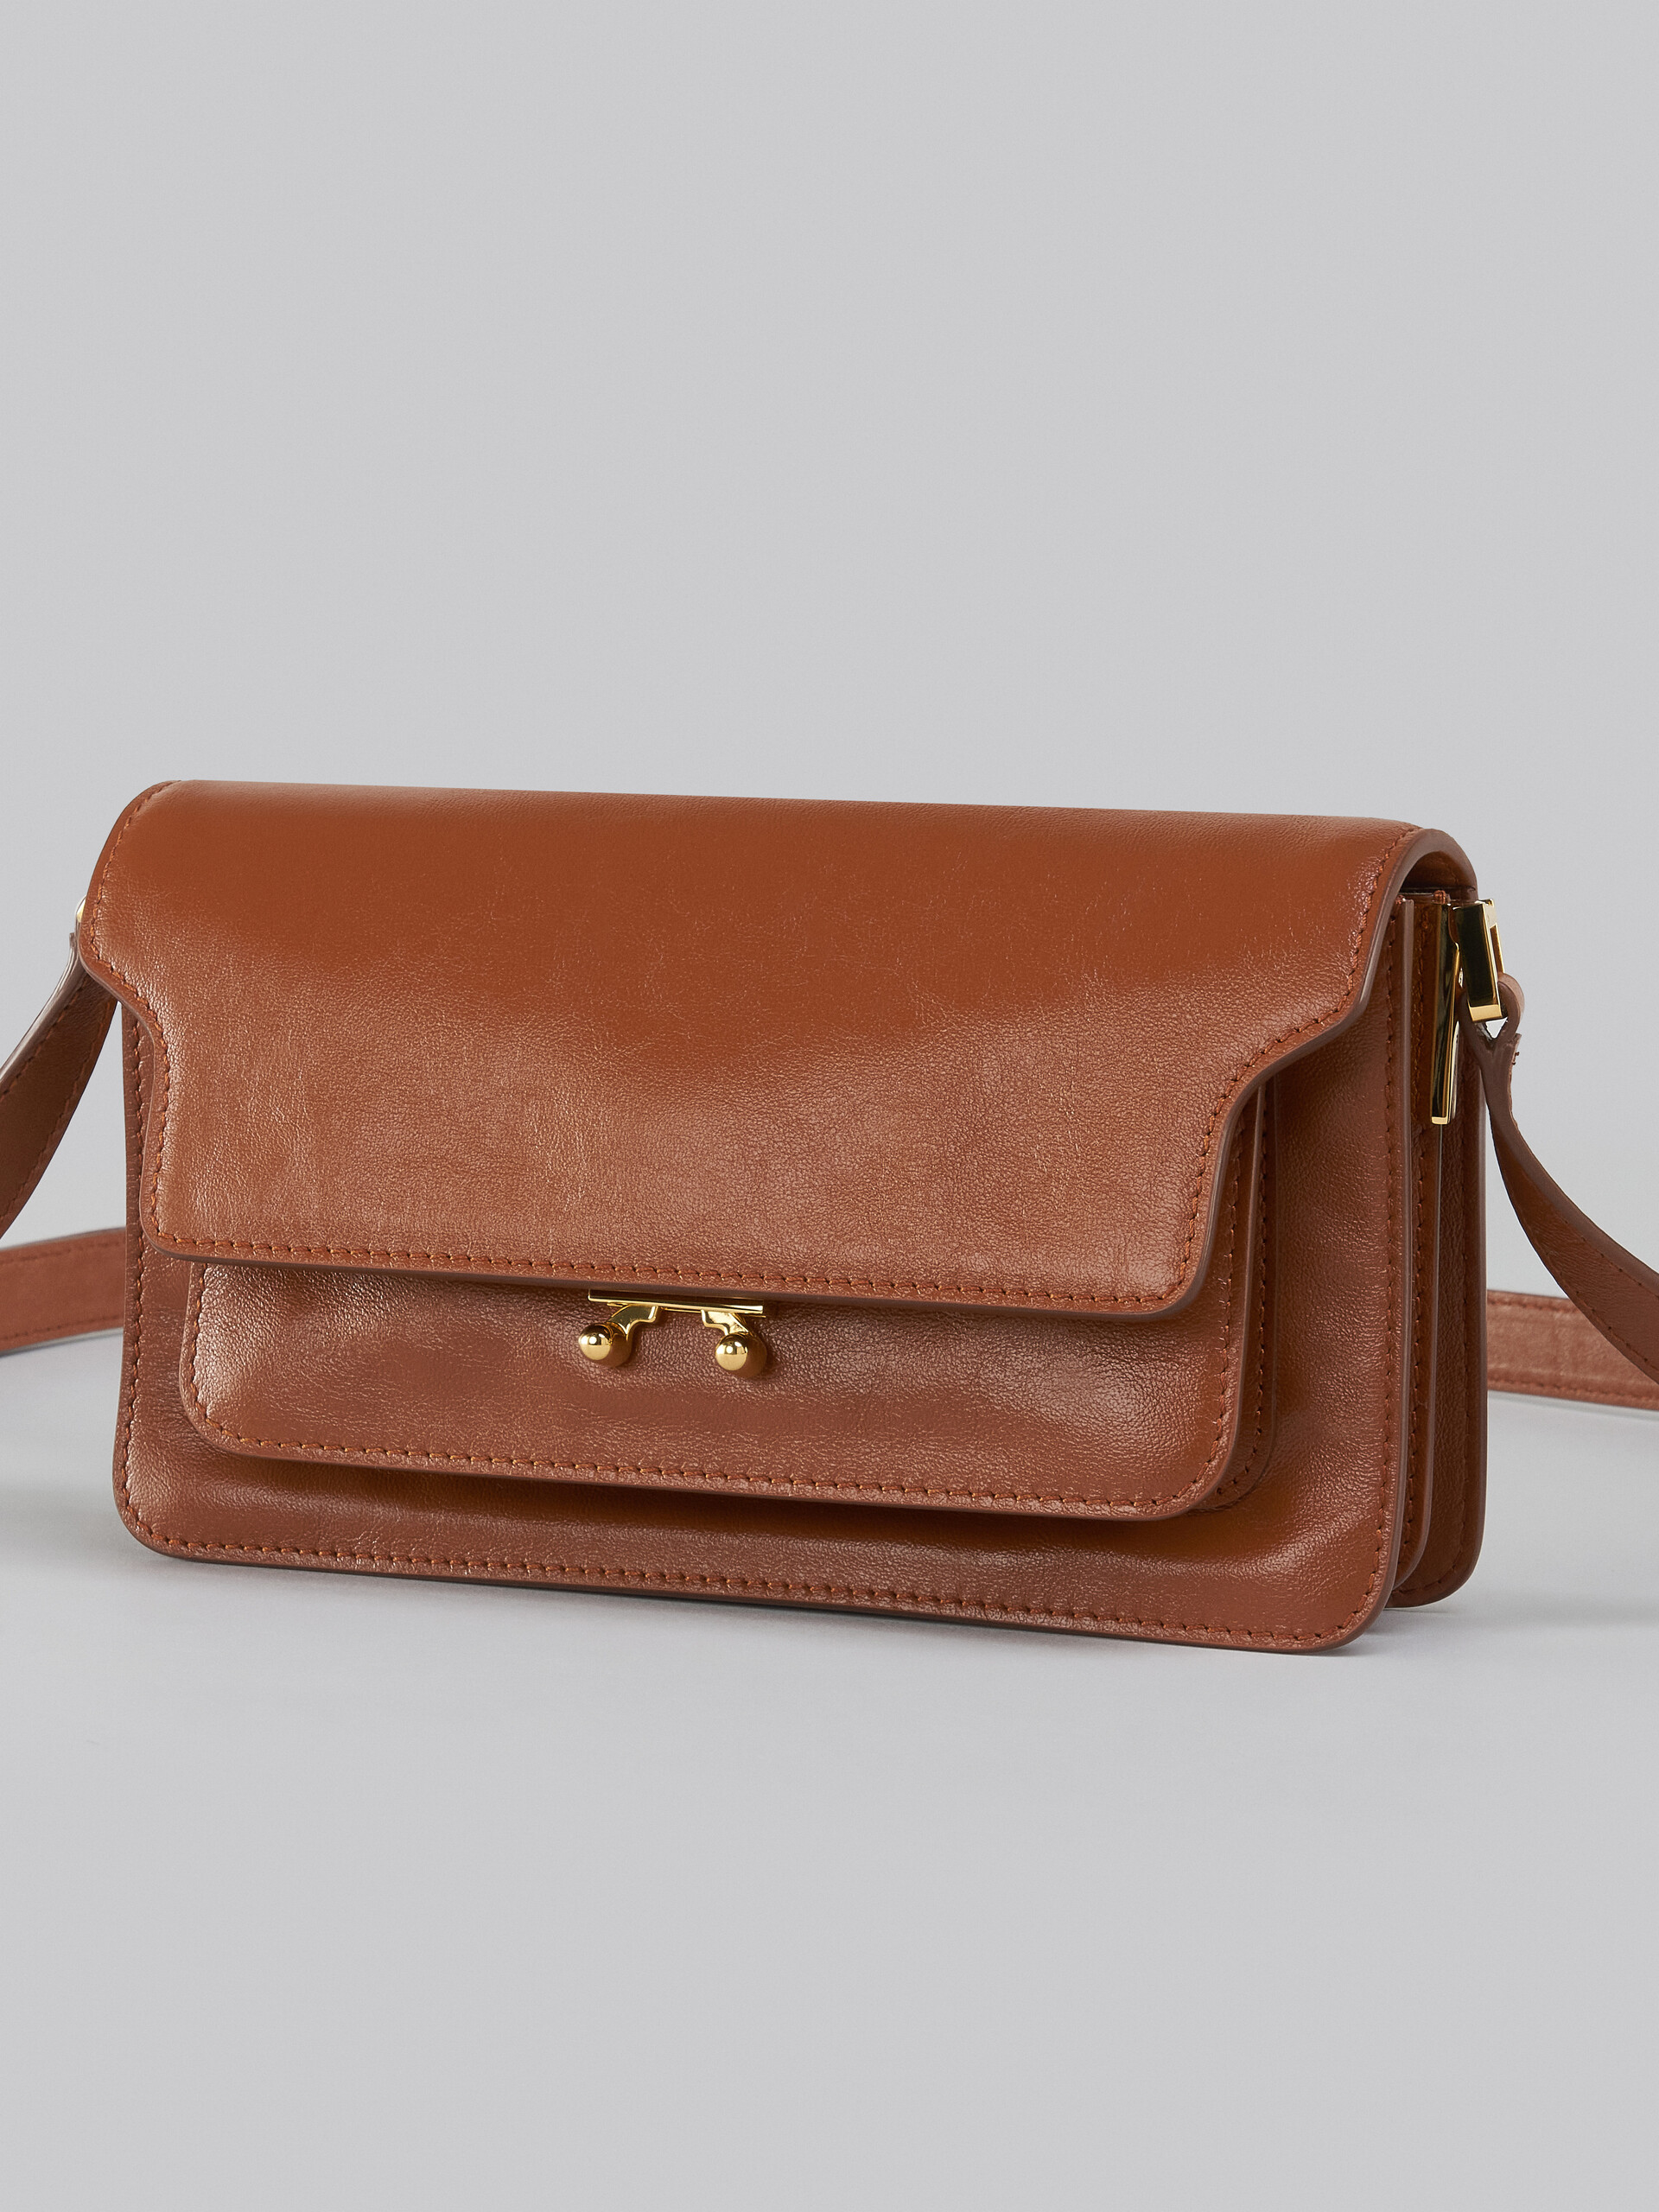 Trunk Soft Bag E/W in brown leather - Shoulder Bags - Image 4